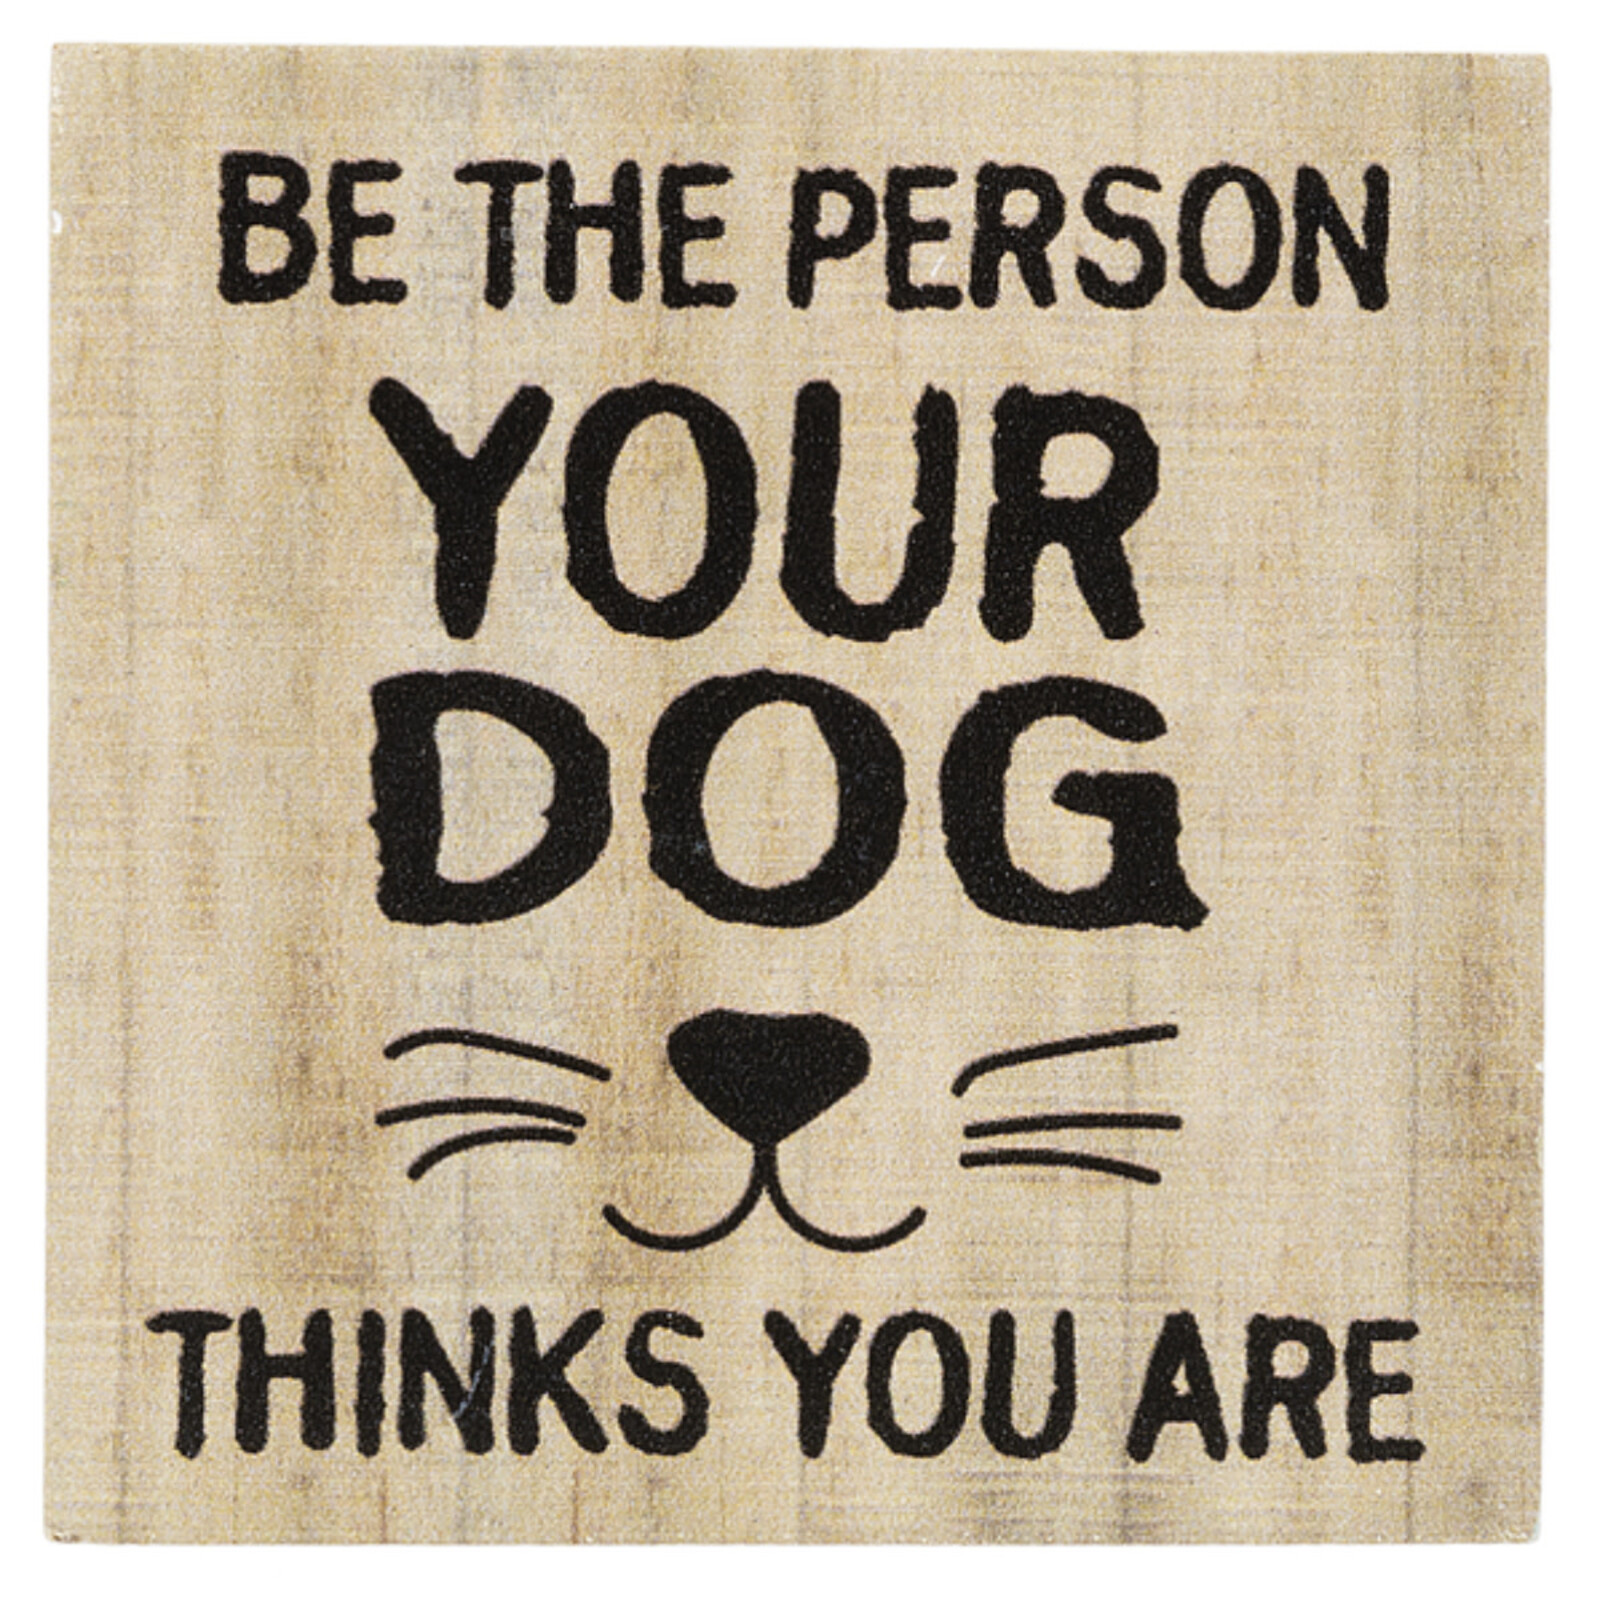 Ganz Block Talk - Be the Person your Dog   ER69351 loading=